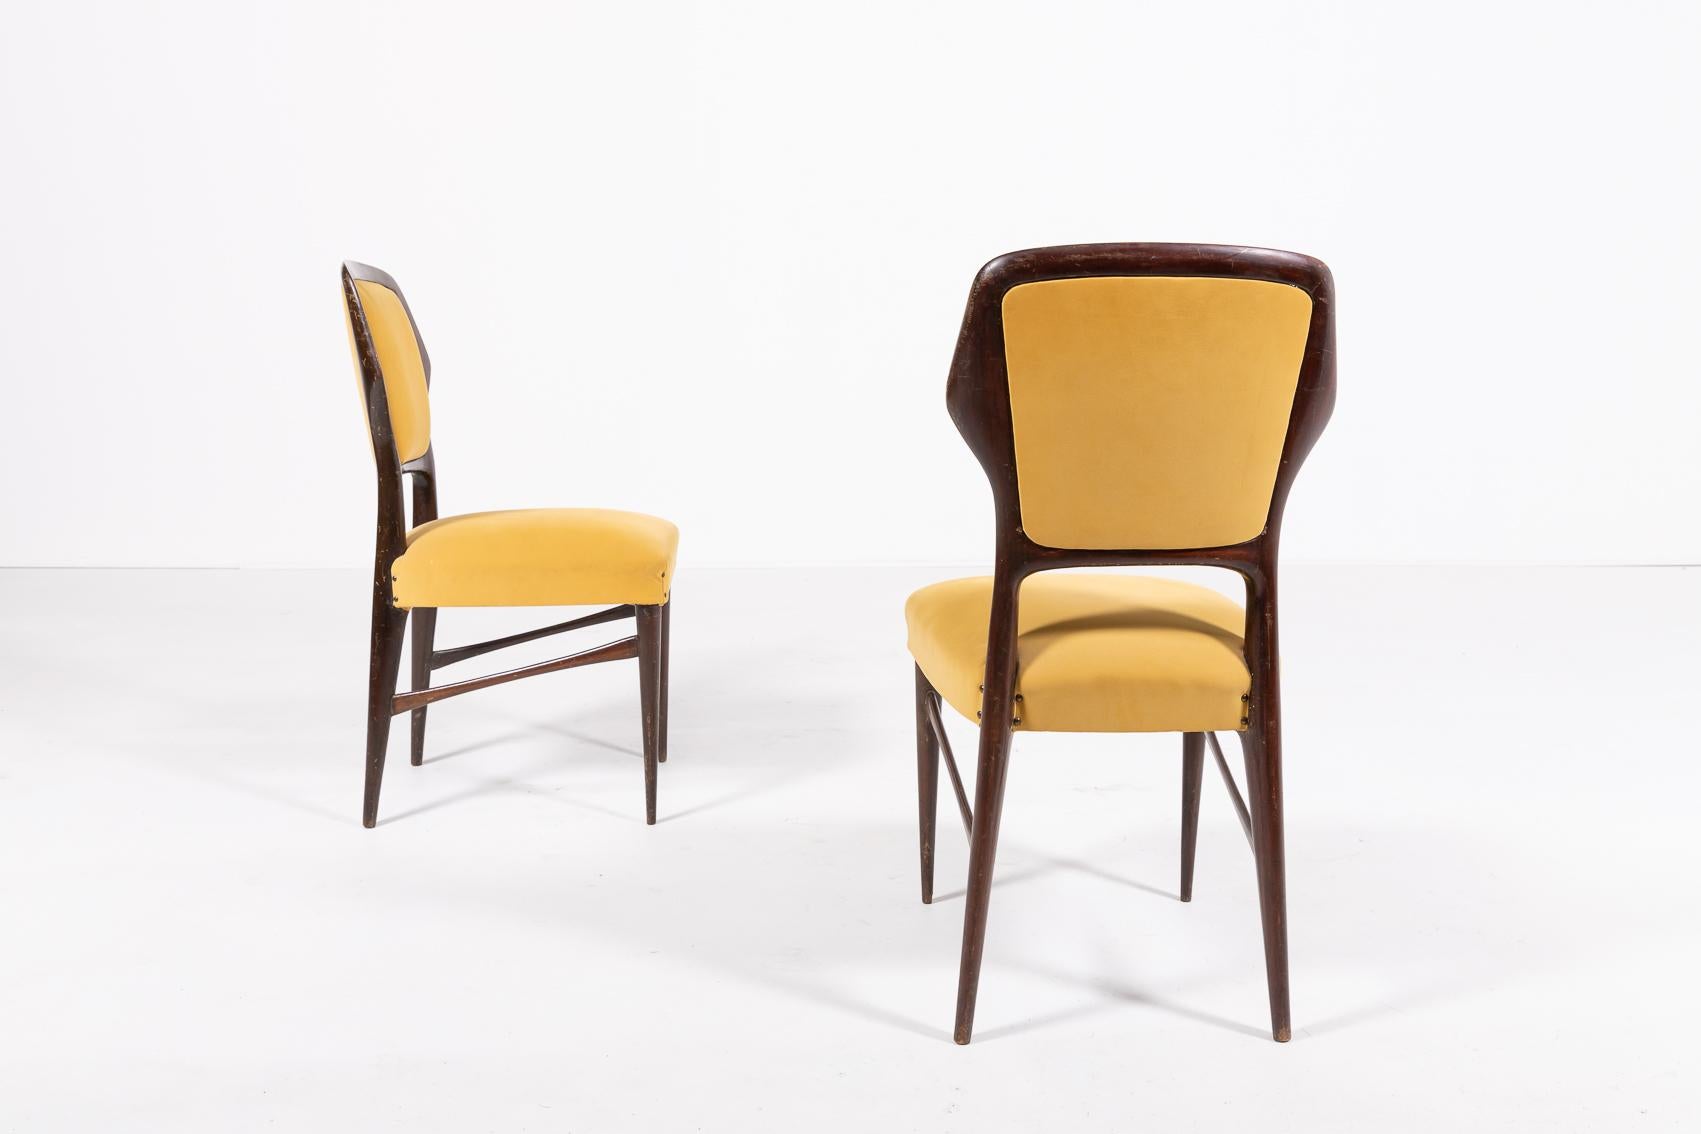 Mid-20th Century Italian Mid-Century Modern chairs from Vittorio Dassi, 1960s For Sale